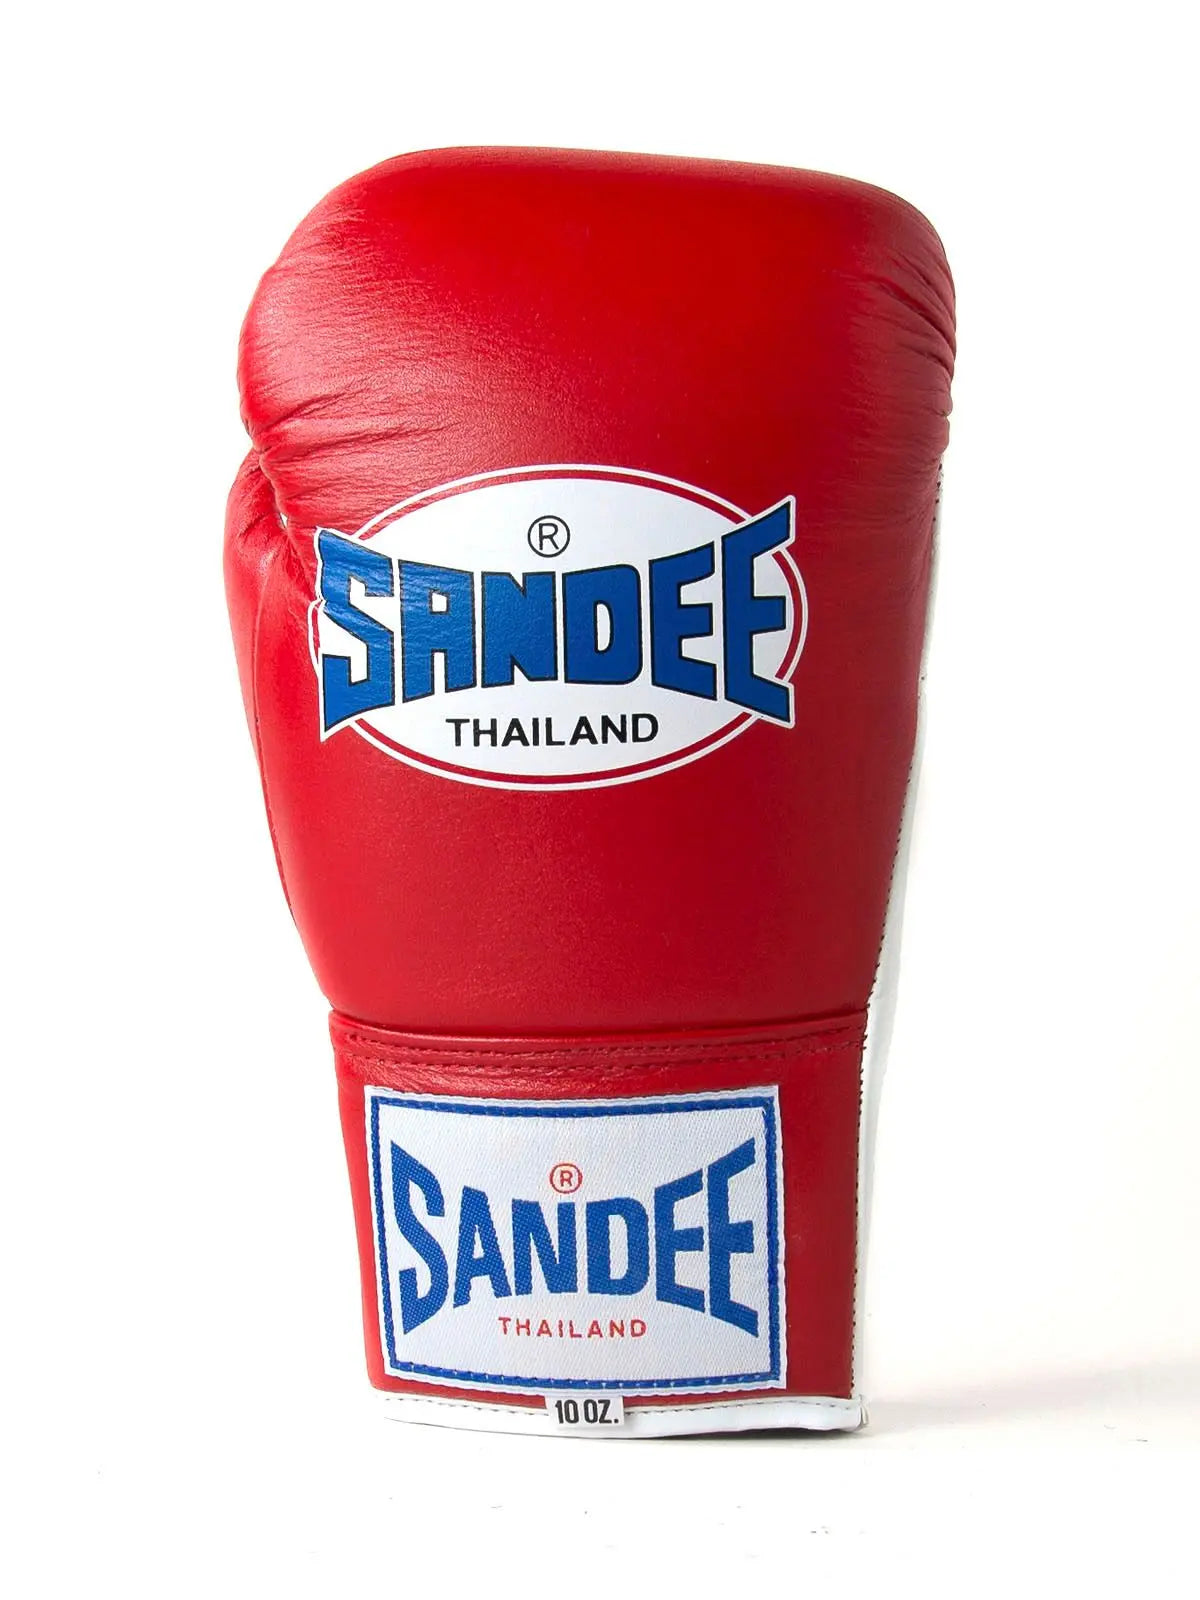 Sandee Lace Up Boxing Gloves Sandee